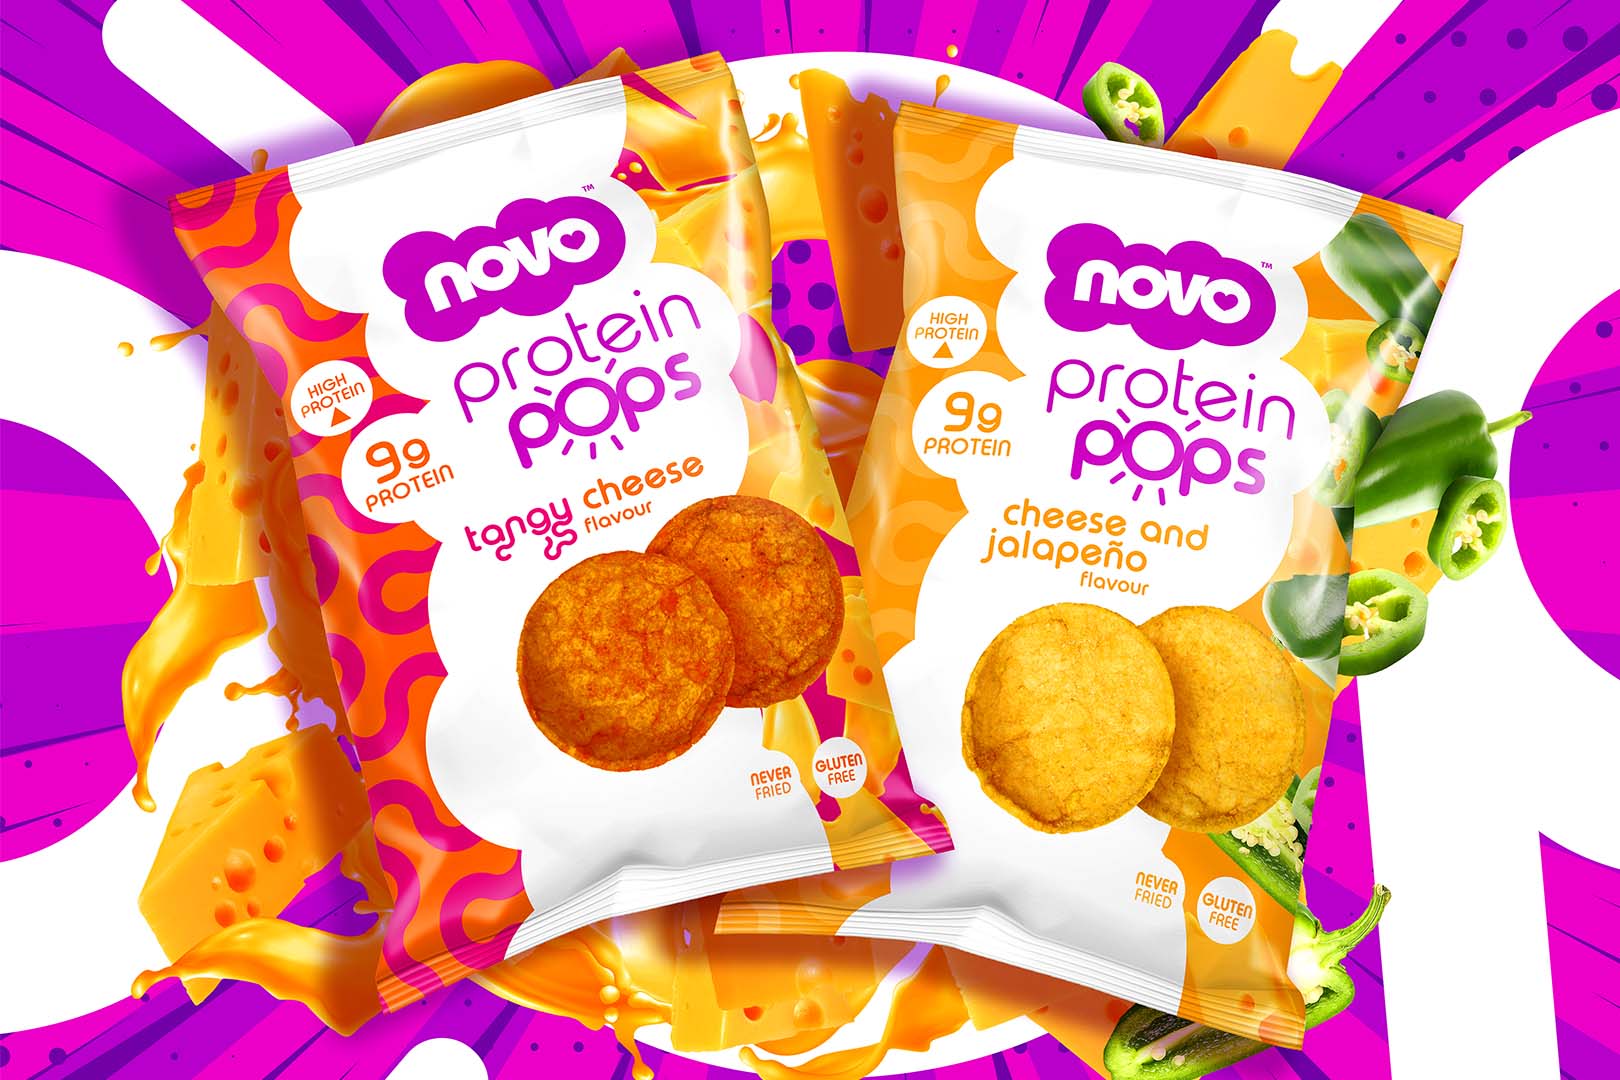 Novo Protein Pops Tangy Cheese